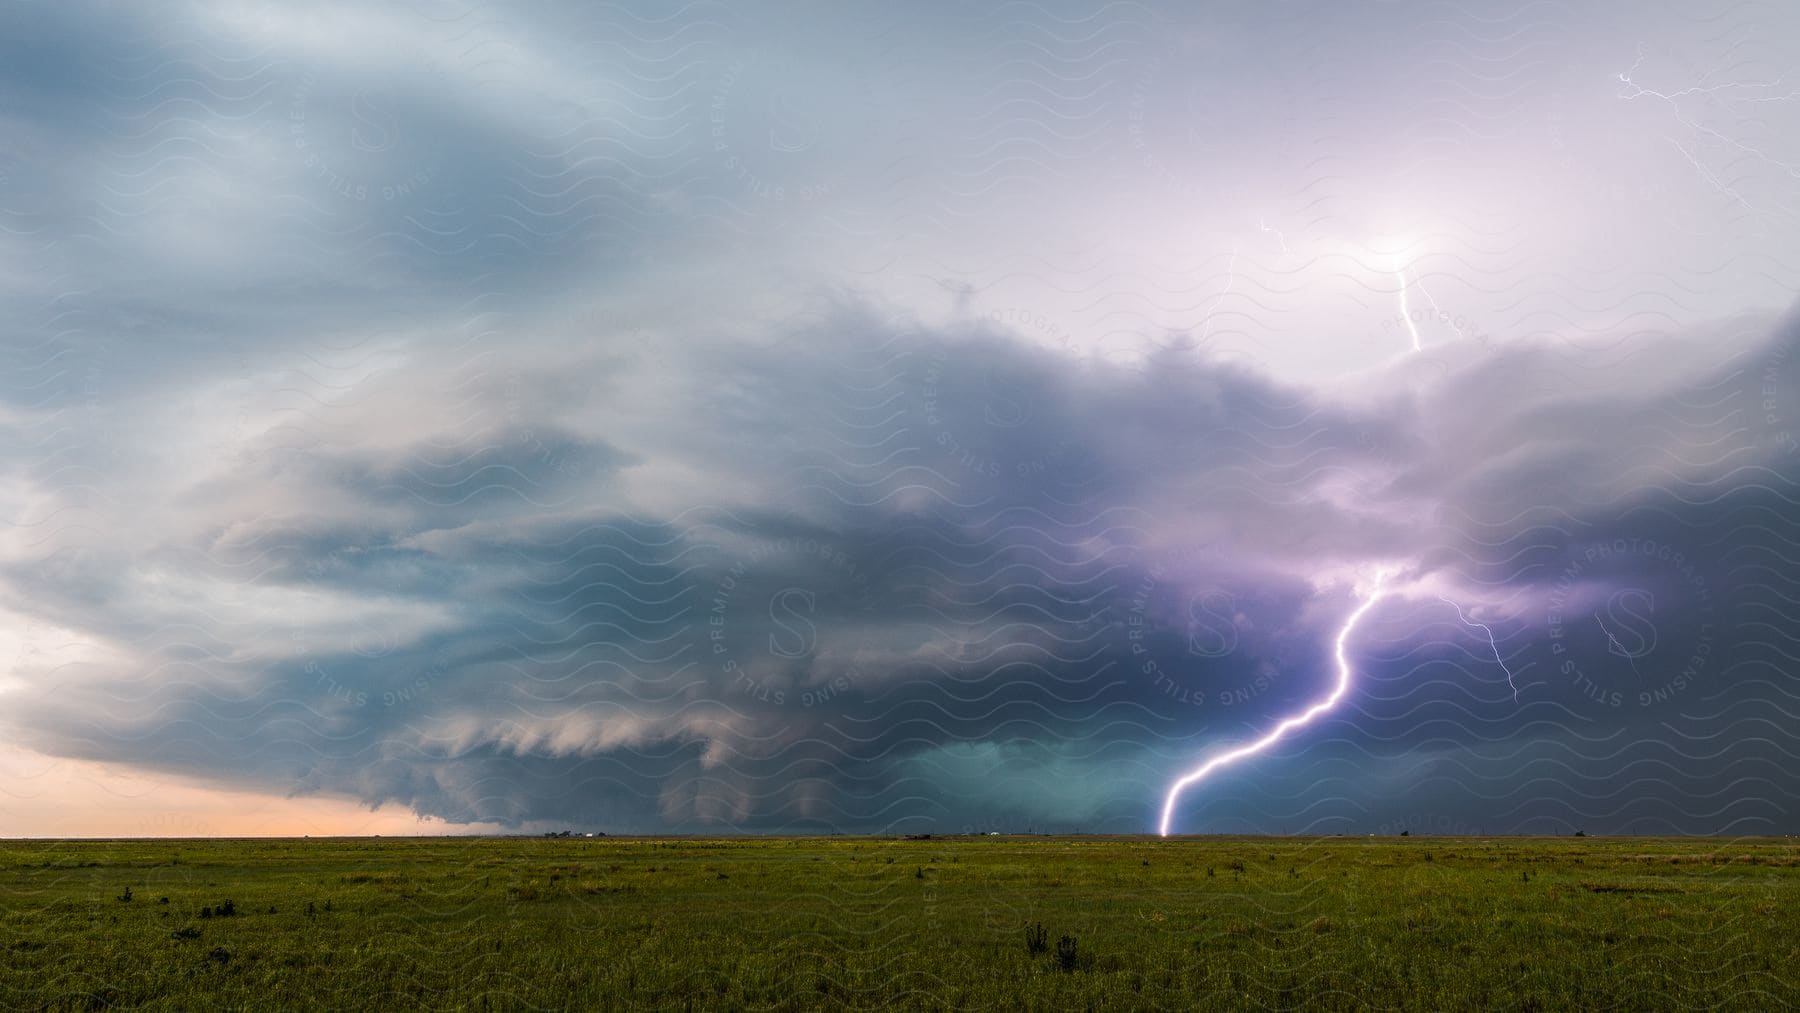 A bright lightning bolt strikes the ground as a storm supercell moves over rural land